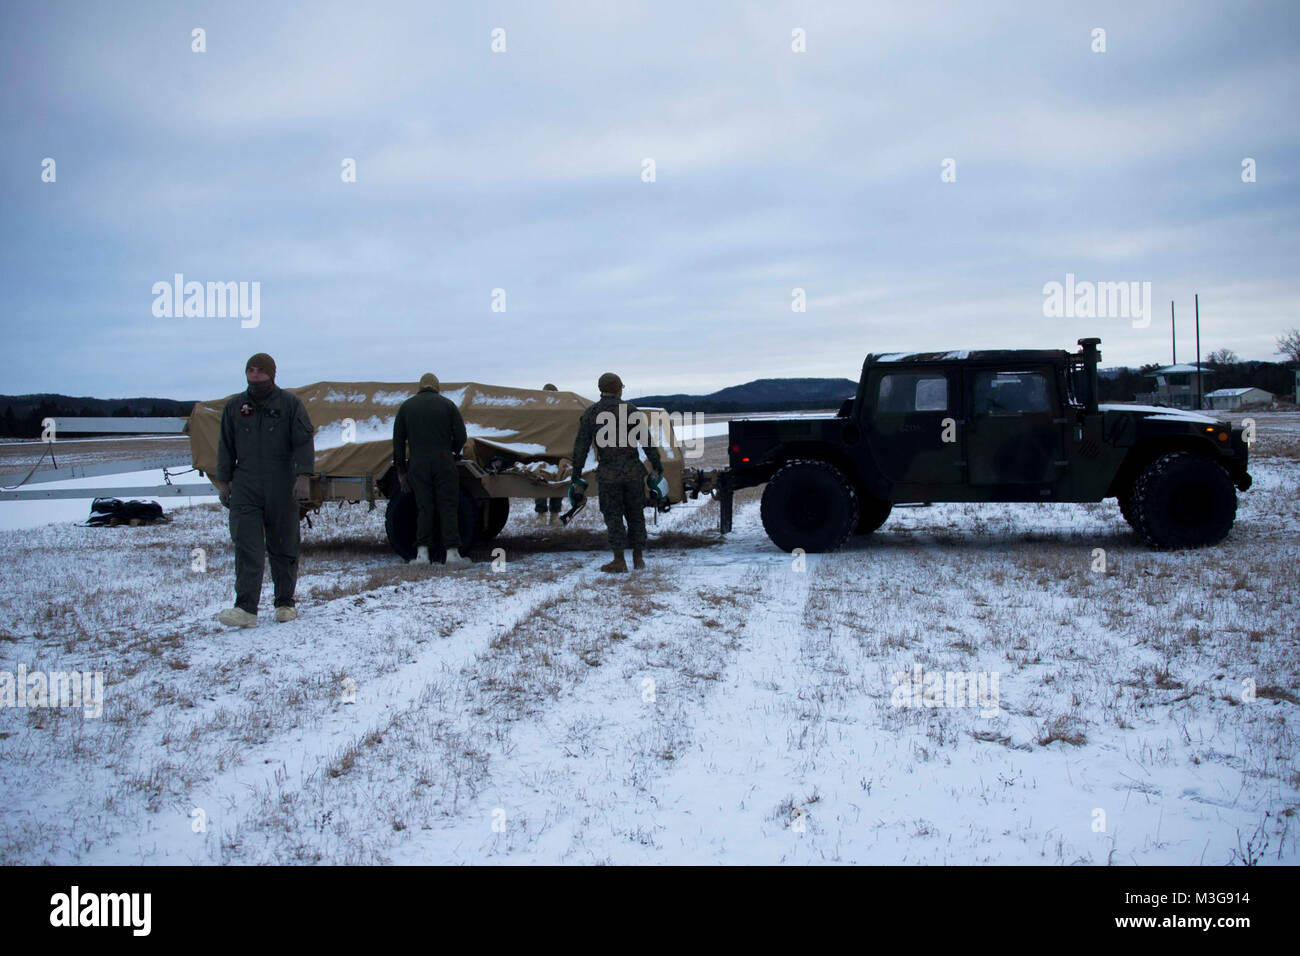 U.S. Marines with Marine Unmanned Aerial Vehicle Squadron (VMU) 2 prepare a recovery system prior to launching an RQ-21A Blackjack during Frozen Badger on Fort McCoy, Wis., Jan. 29, 2018. Frozen Badger is a training exercise designed to improve VMU-2's operational capabilities in extreme cold weather environments. (U.S. Marine Corps Stock Photo